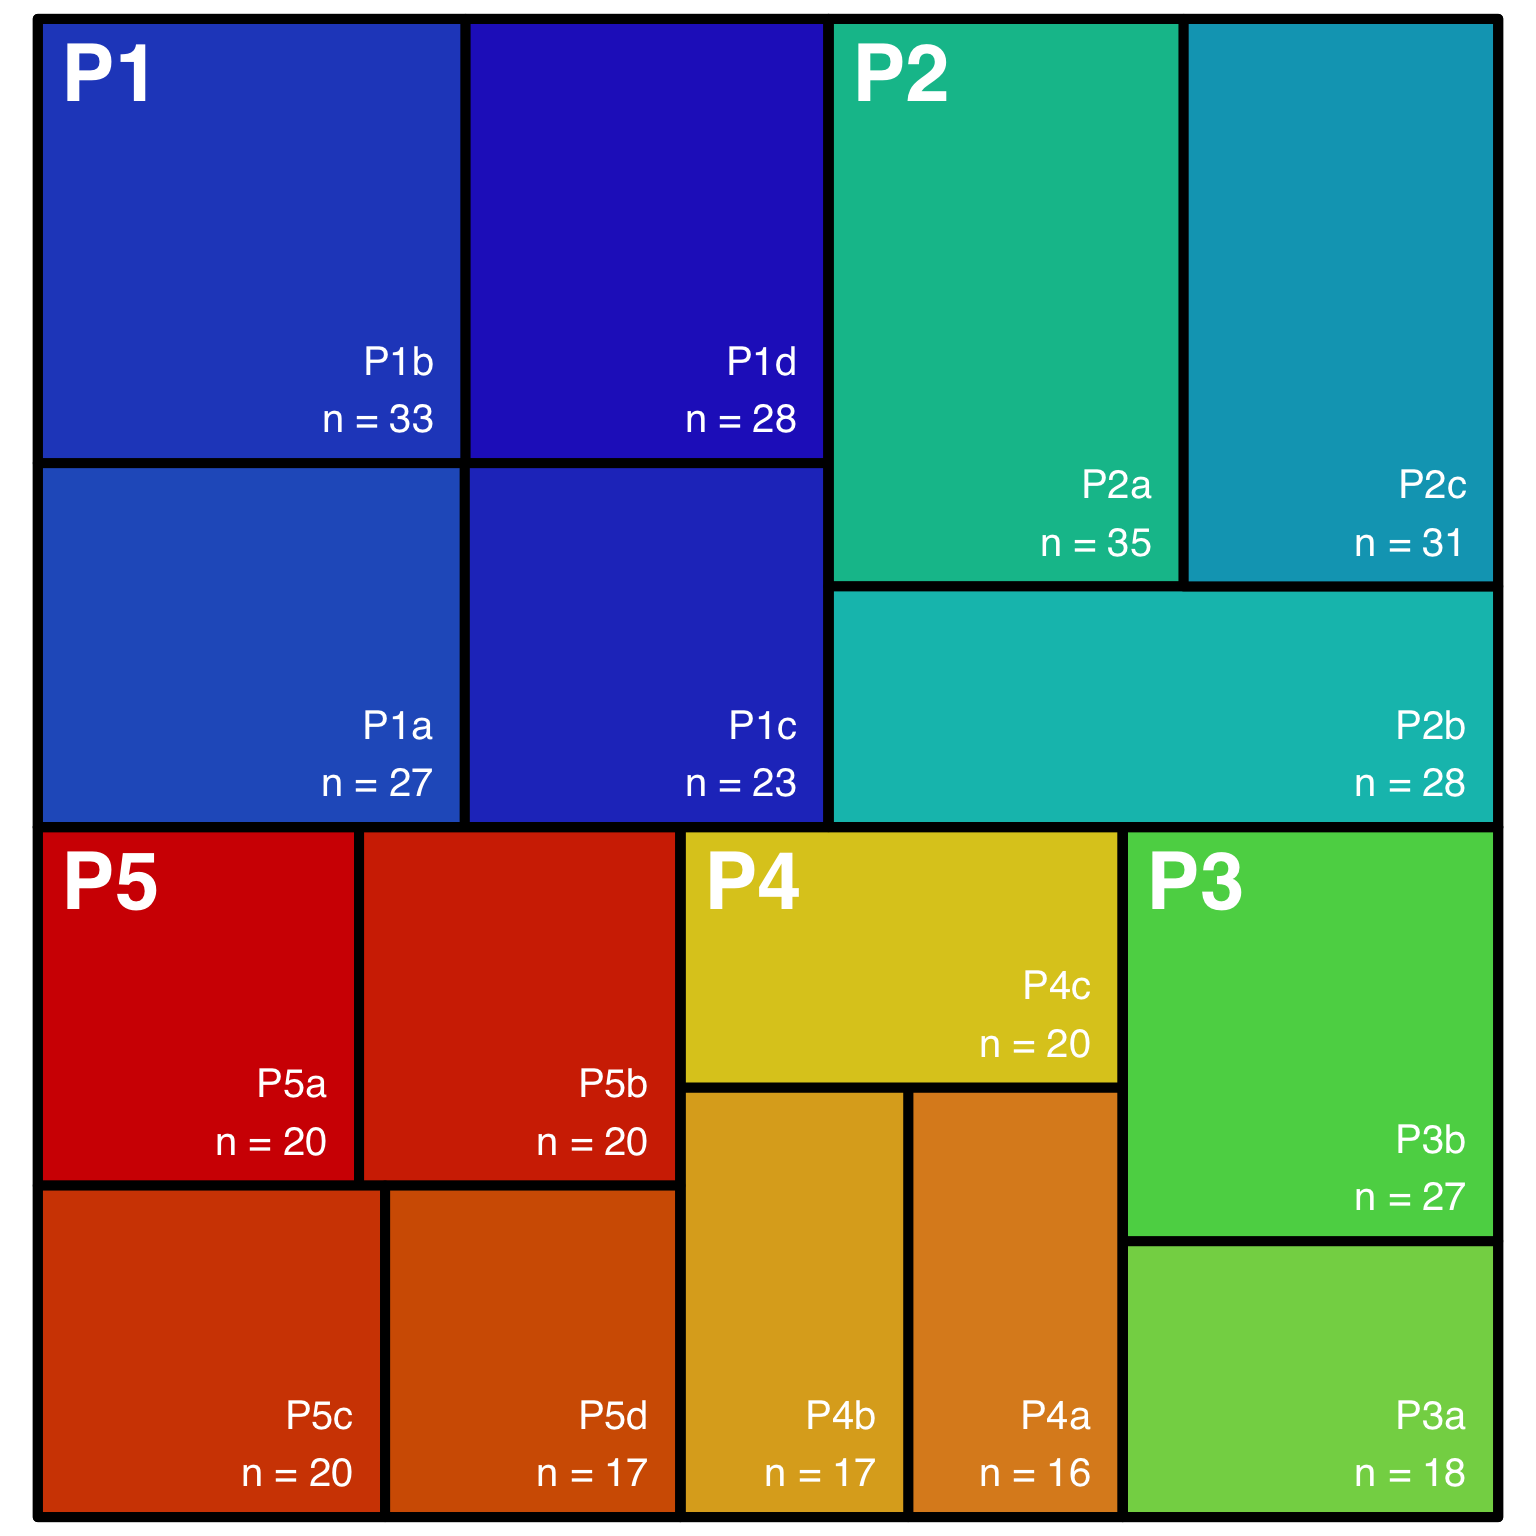 Treemap plot of classes nested in grades (P1 to P5). There are 2-4 classes in each grade with 16-35 students. The size of each box represents the size of the class, and the colour of the box represents the grade.